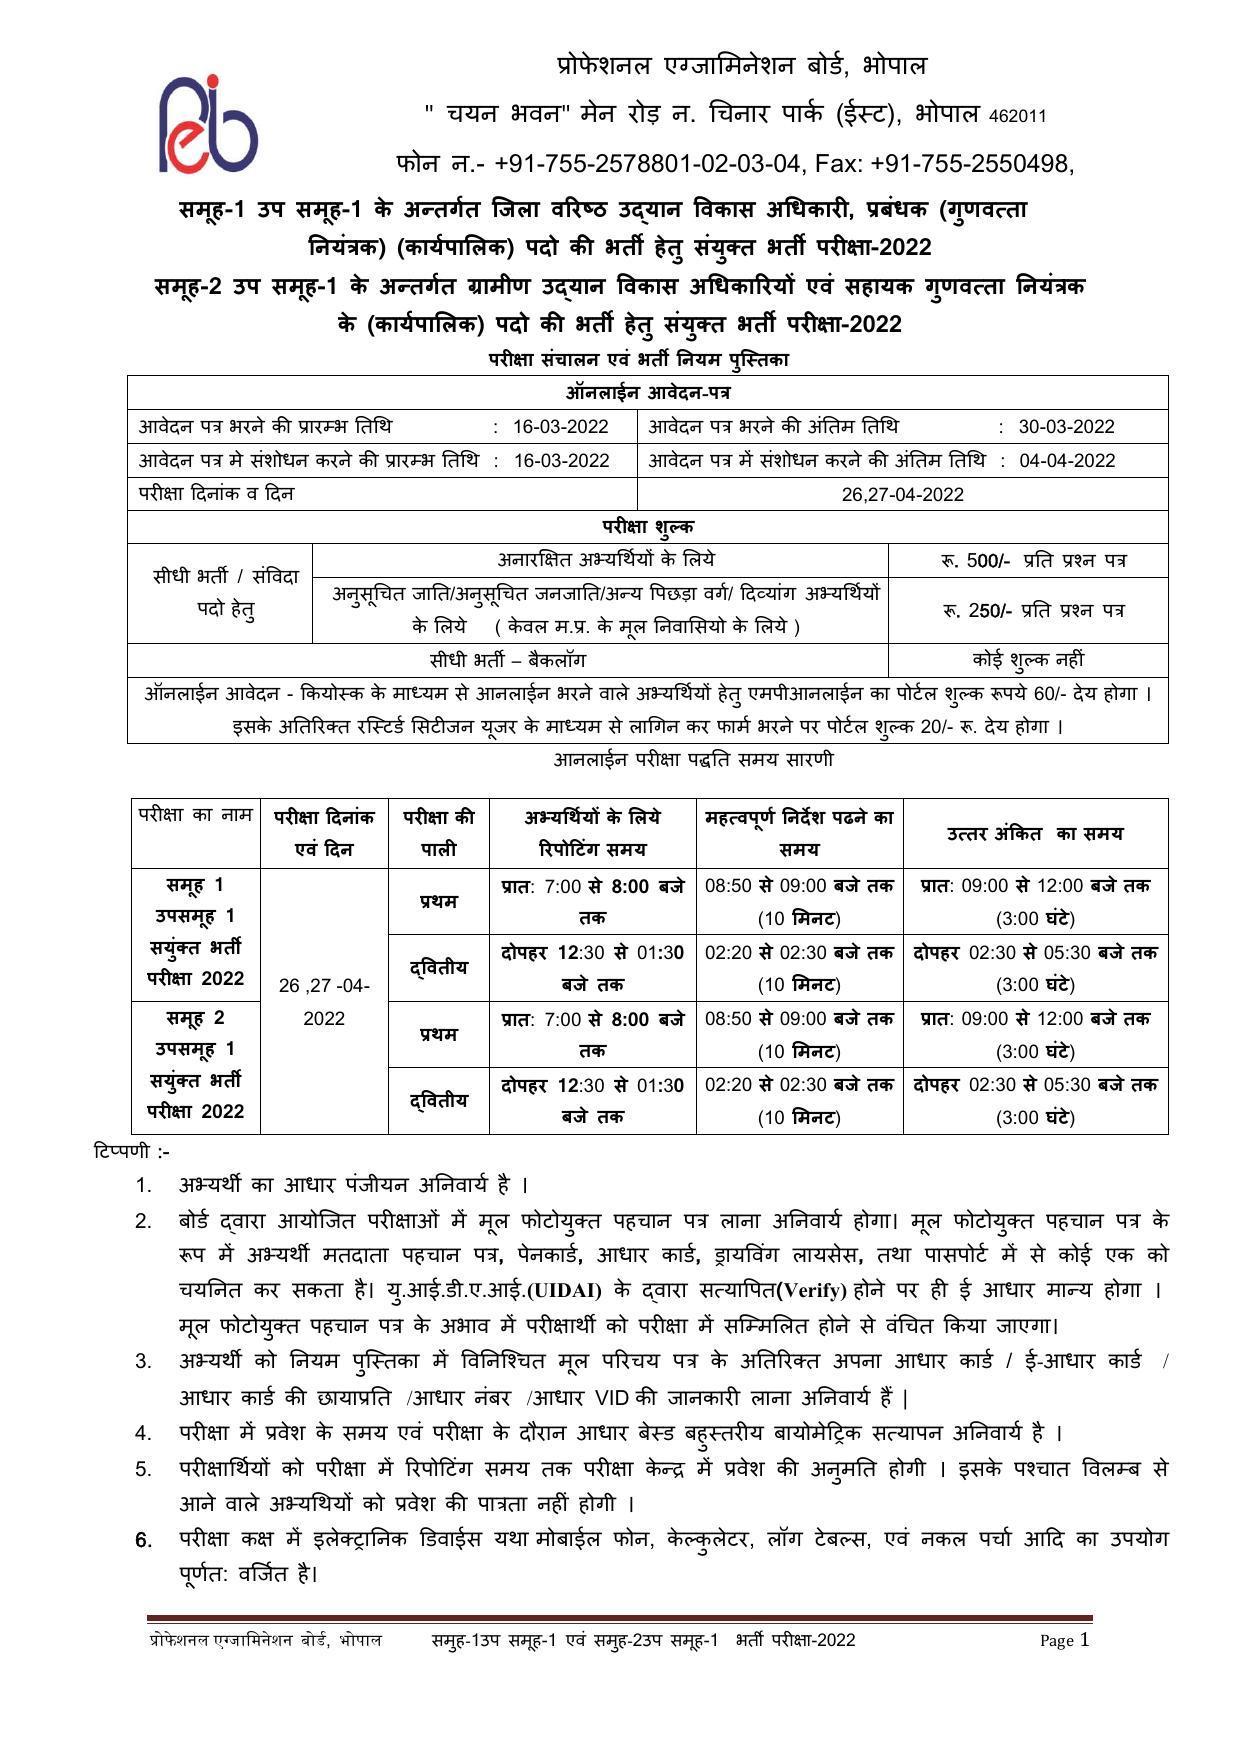 MPPEB Group-I Sub Group-I & Group-II Sub Group-I Recruitment 2022 - Page 5